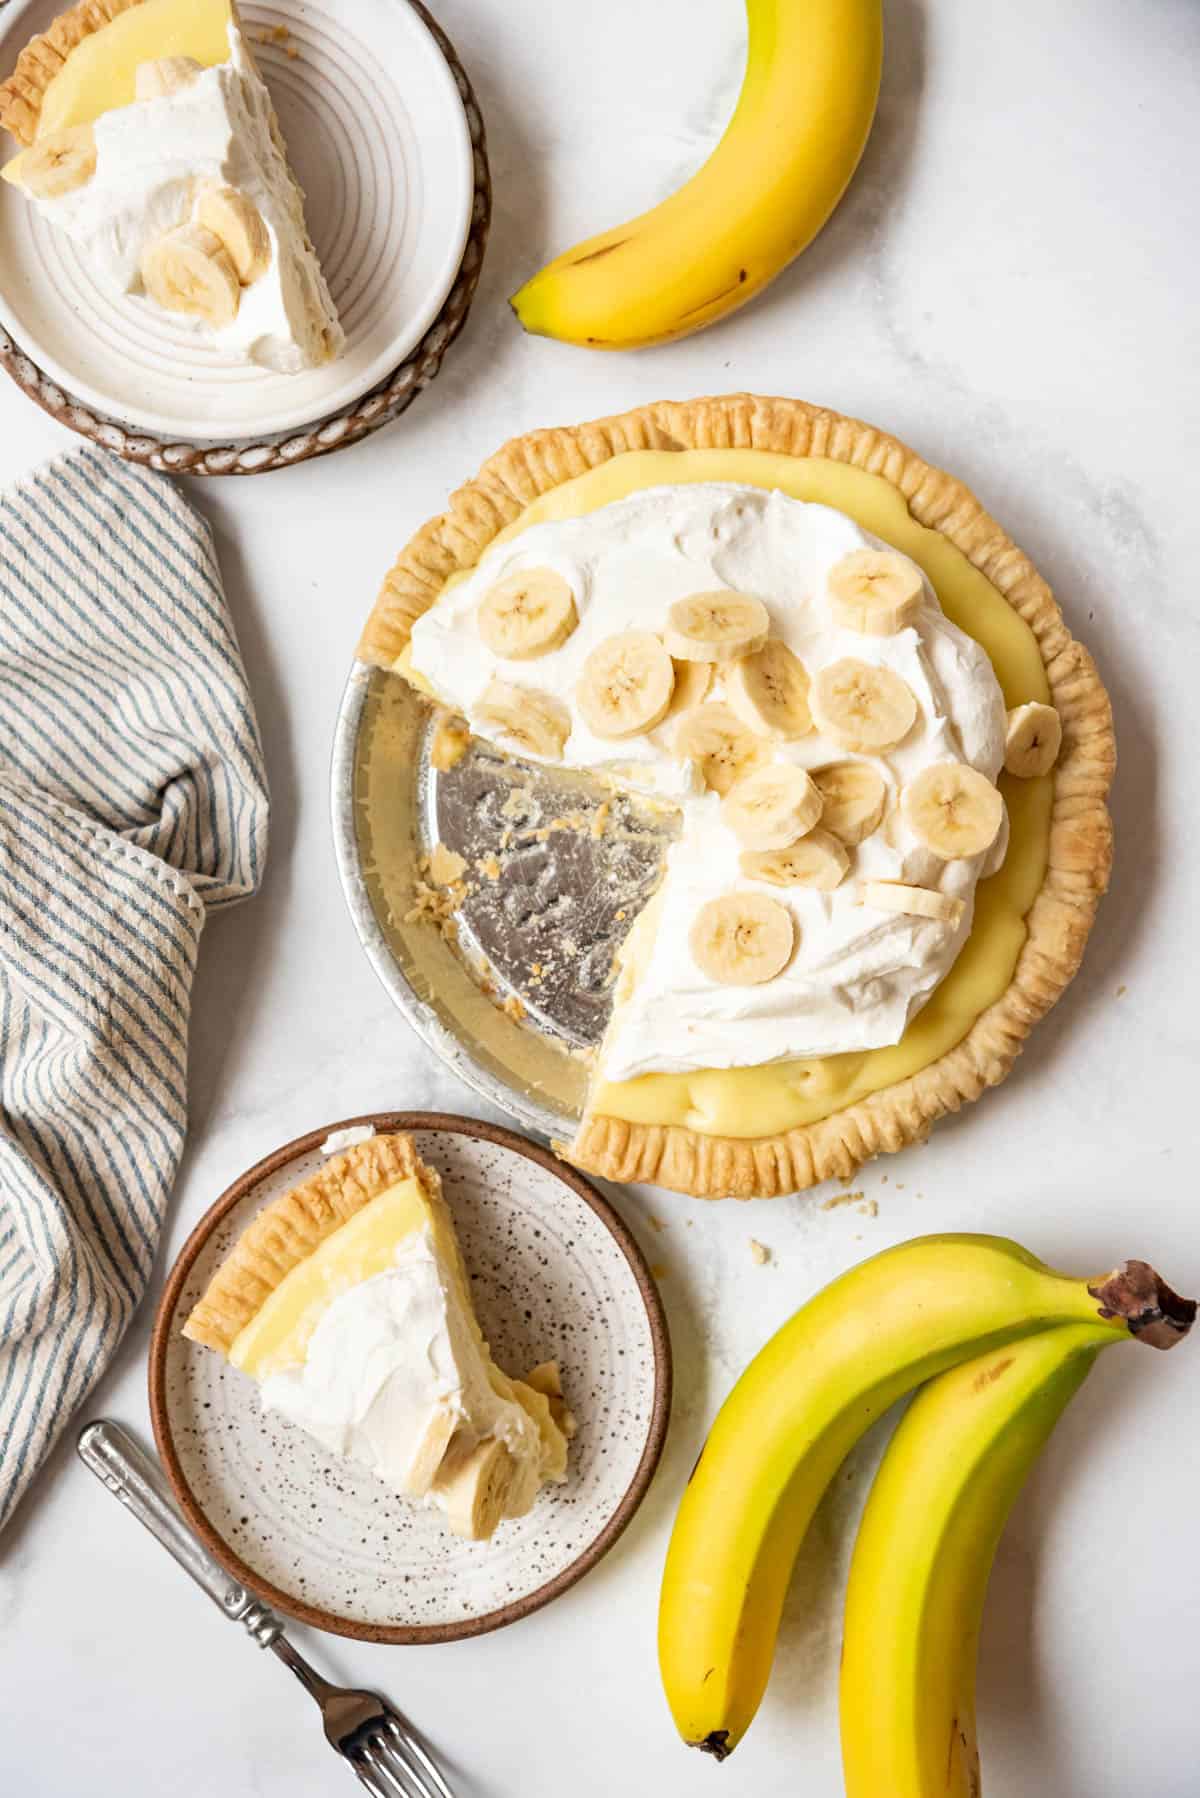 Slices of banana cream pie on plates next to the rest of the pie and some ripe bananas.